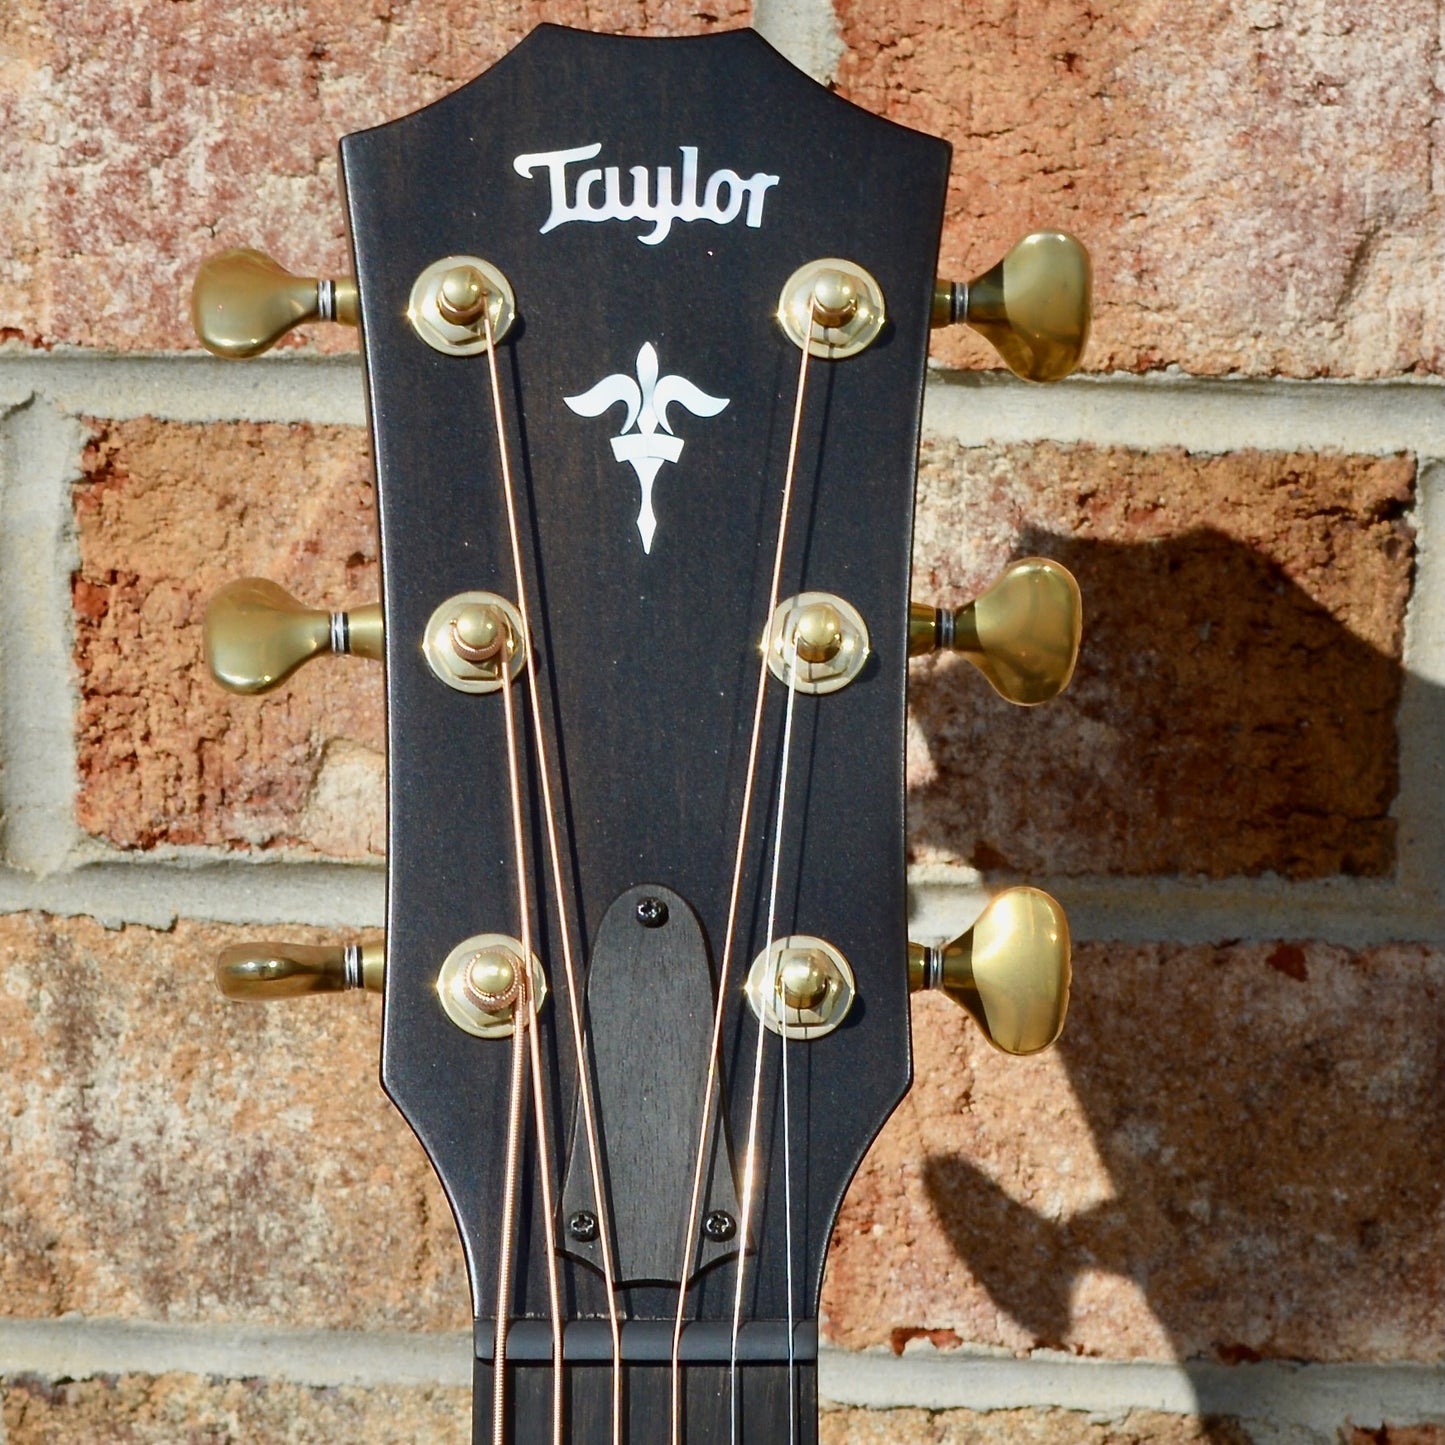 Taylor Builder's Edition 614ce WHB